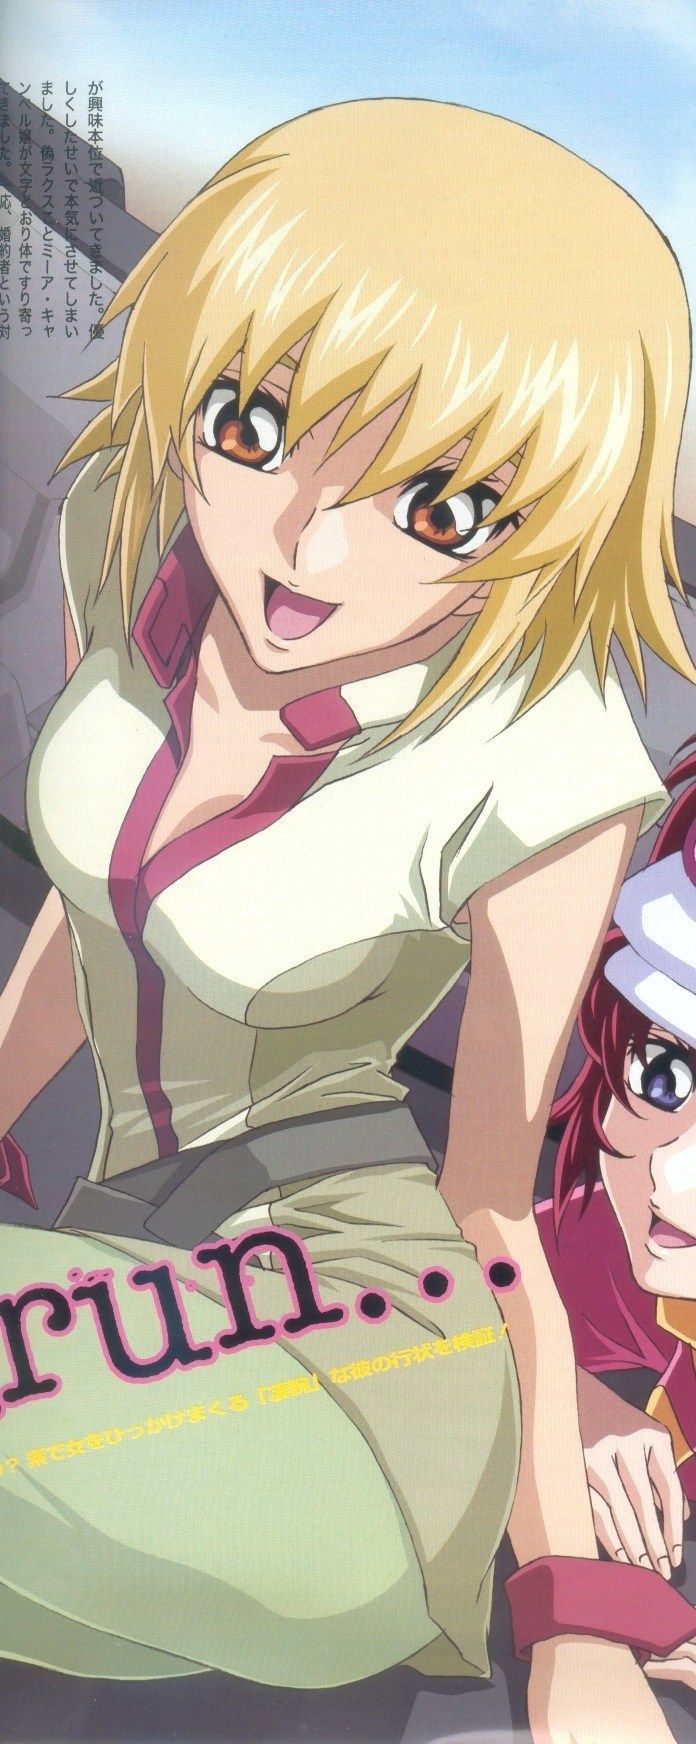 Erotic images of Mobile Suit Gundam SEED 5